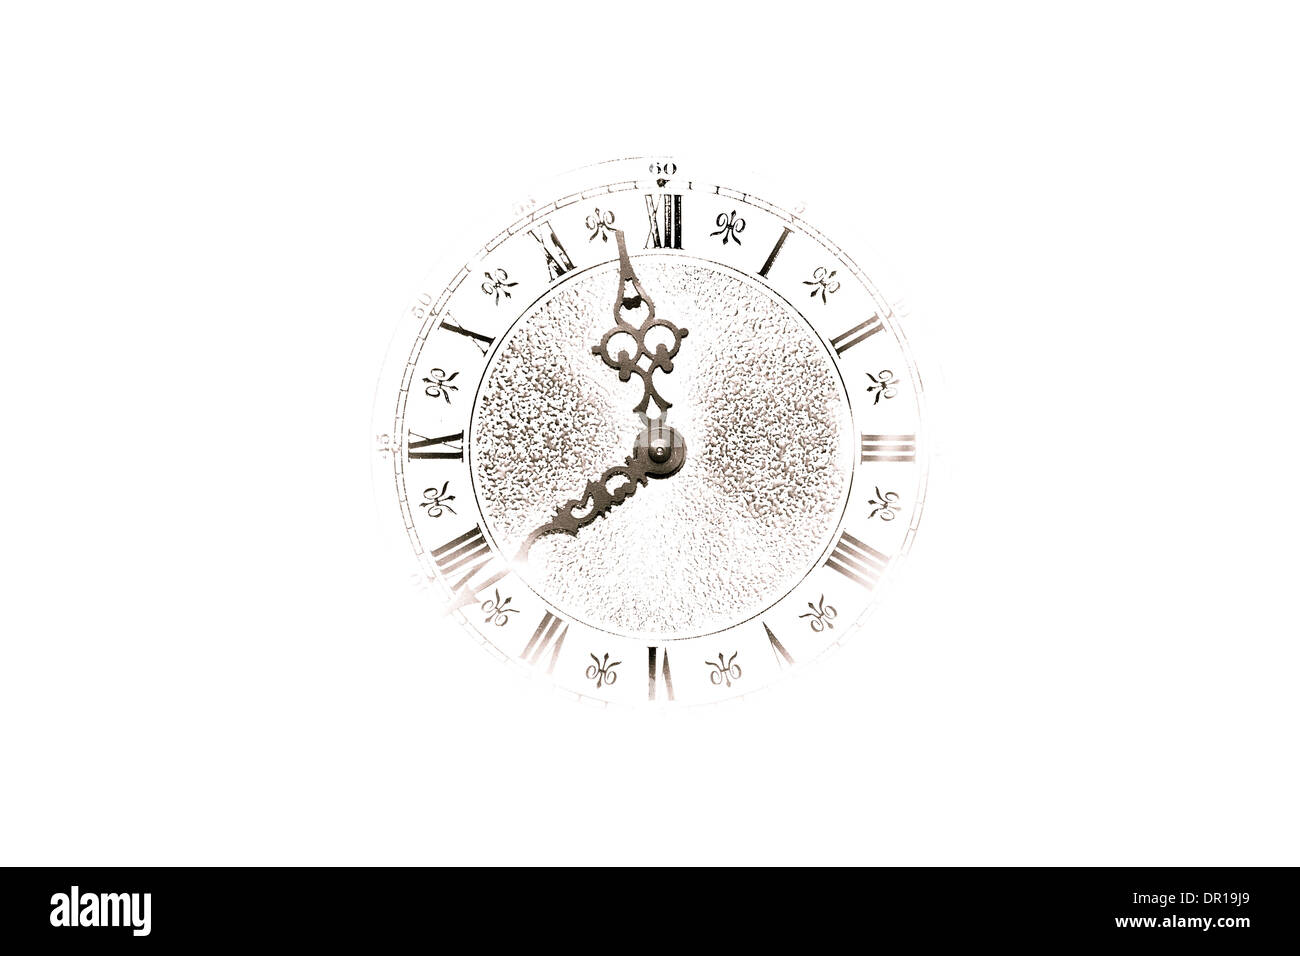 Abstract white background with silhouette of a clock face. Stock Photo